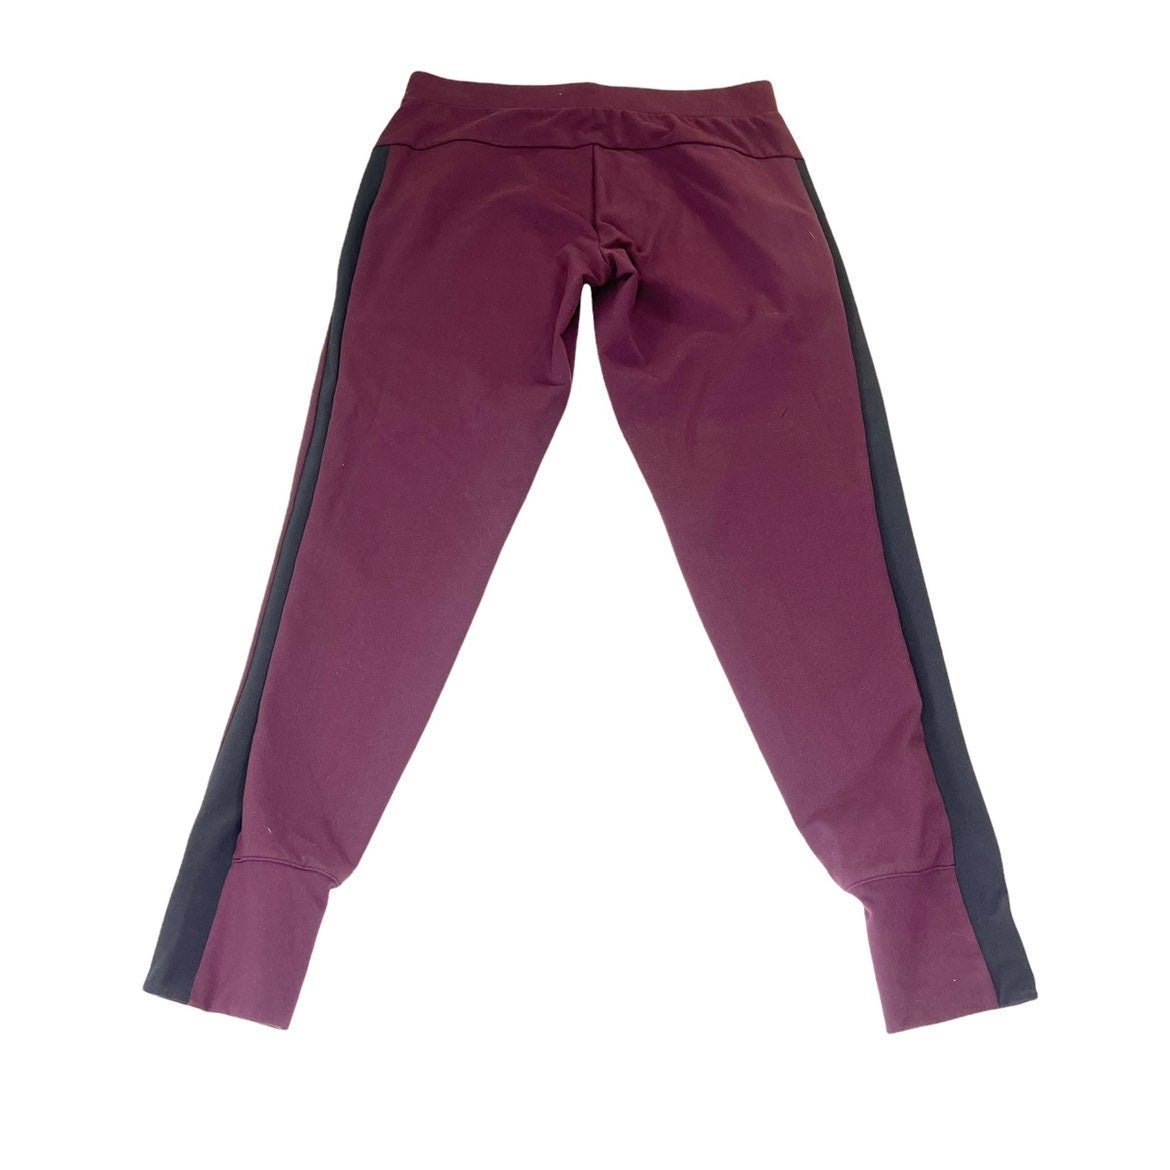 cheapest place to buy  Athleta Metro Track Jogger Womens Size XS Black/Burgundy iU4dqywLY US Sale